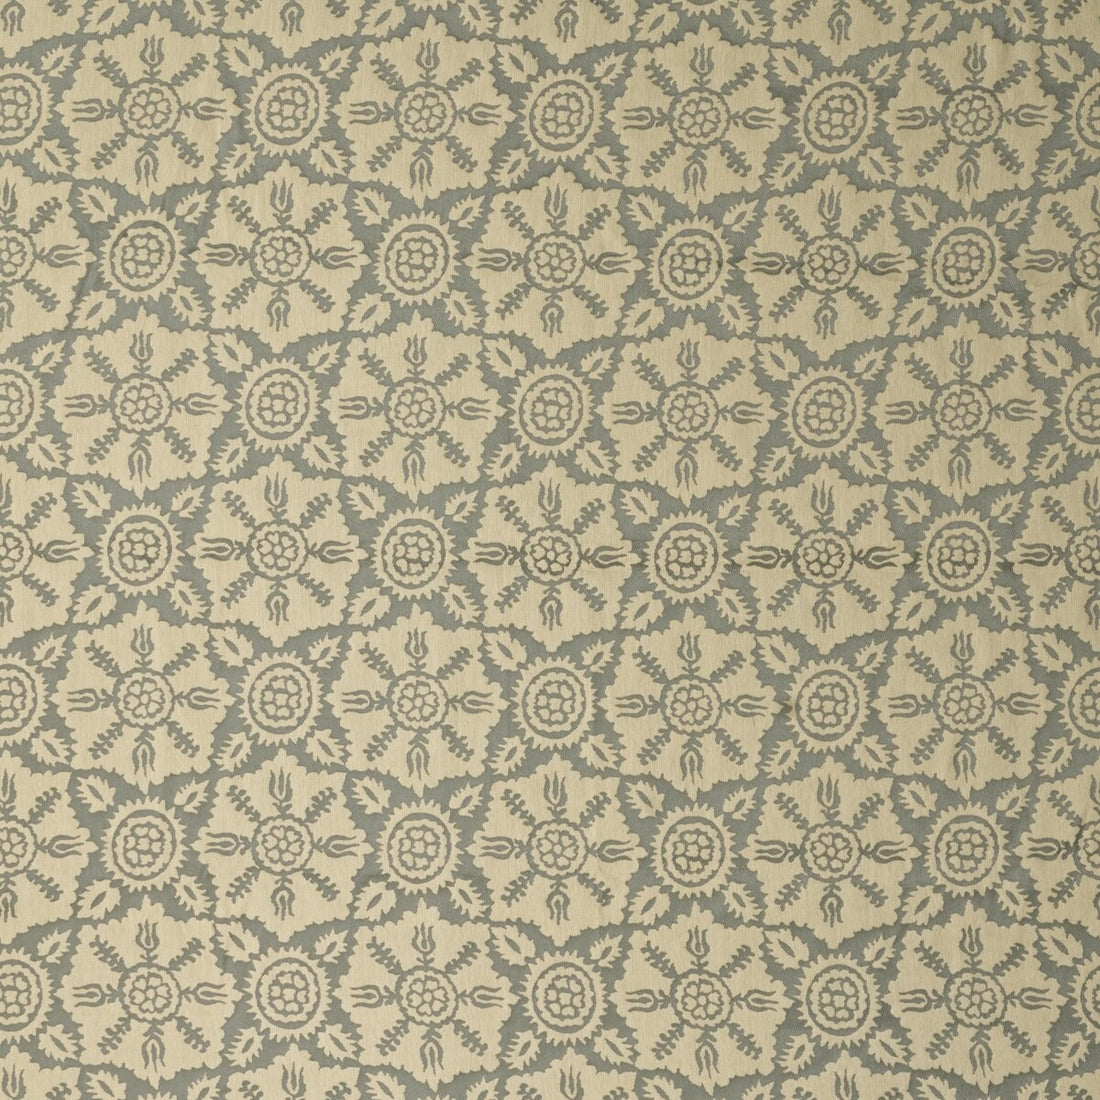 Ormond fabric in shadow color - pattern BFC-3679.21.0 - by Lee Jofa in the Blithfield collection